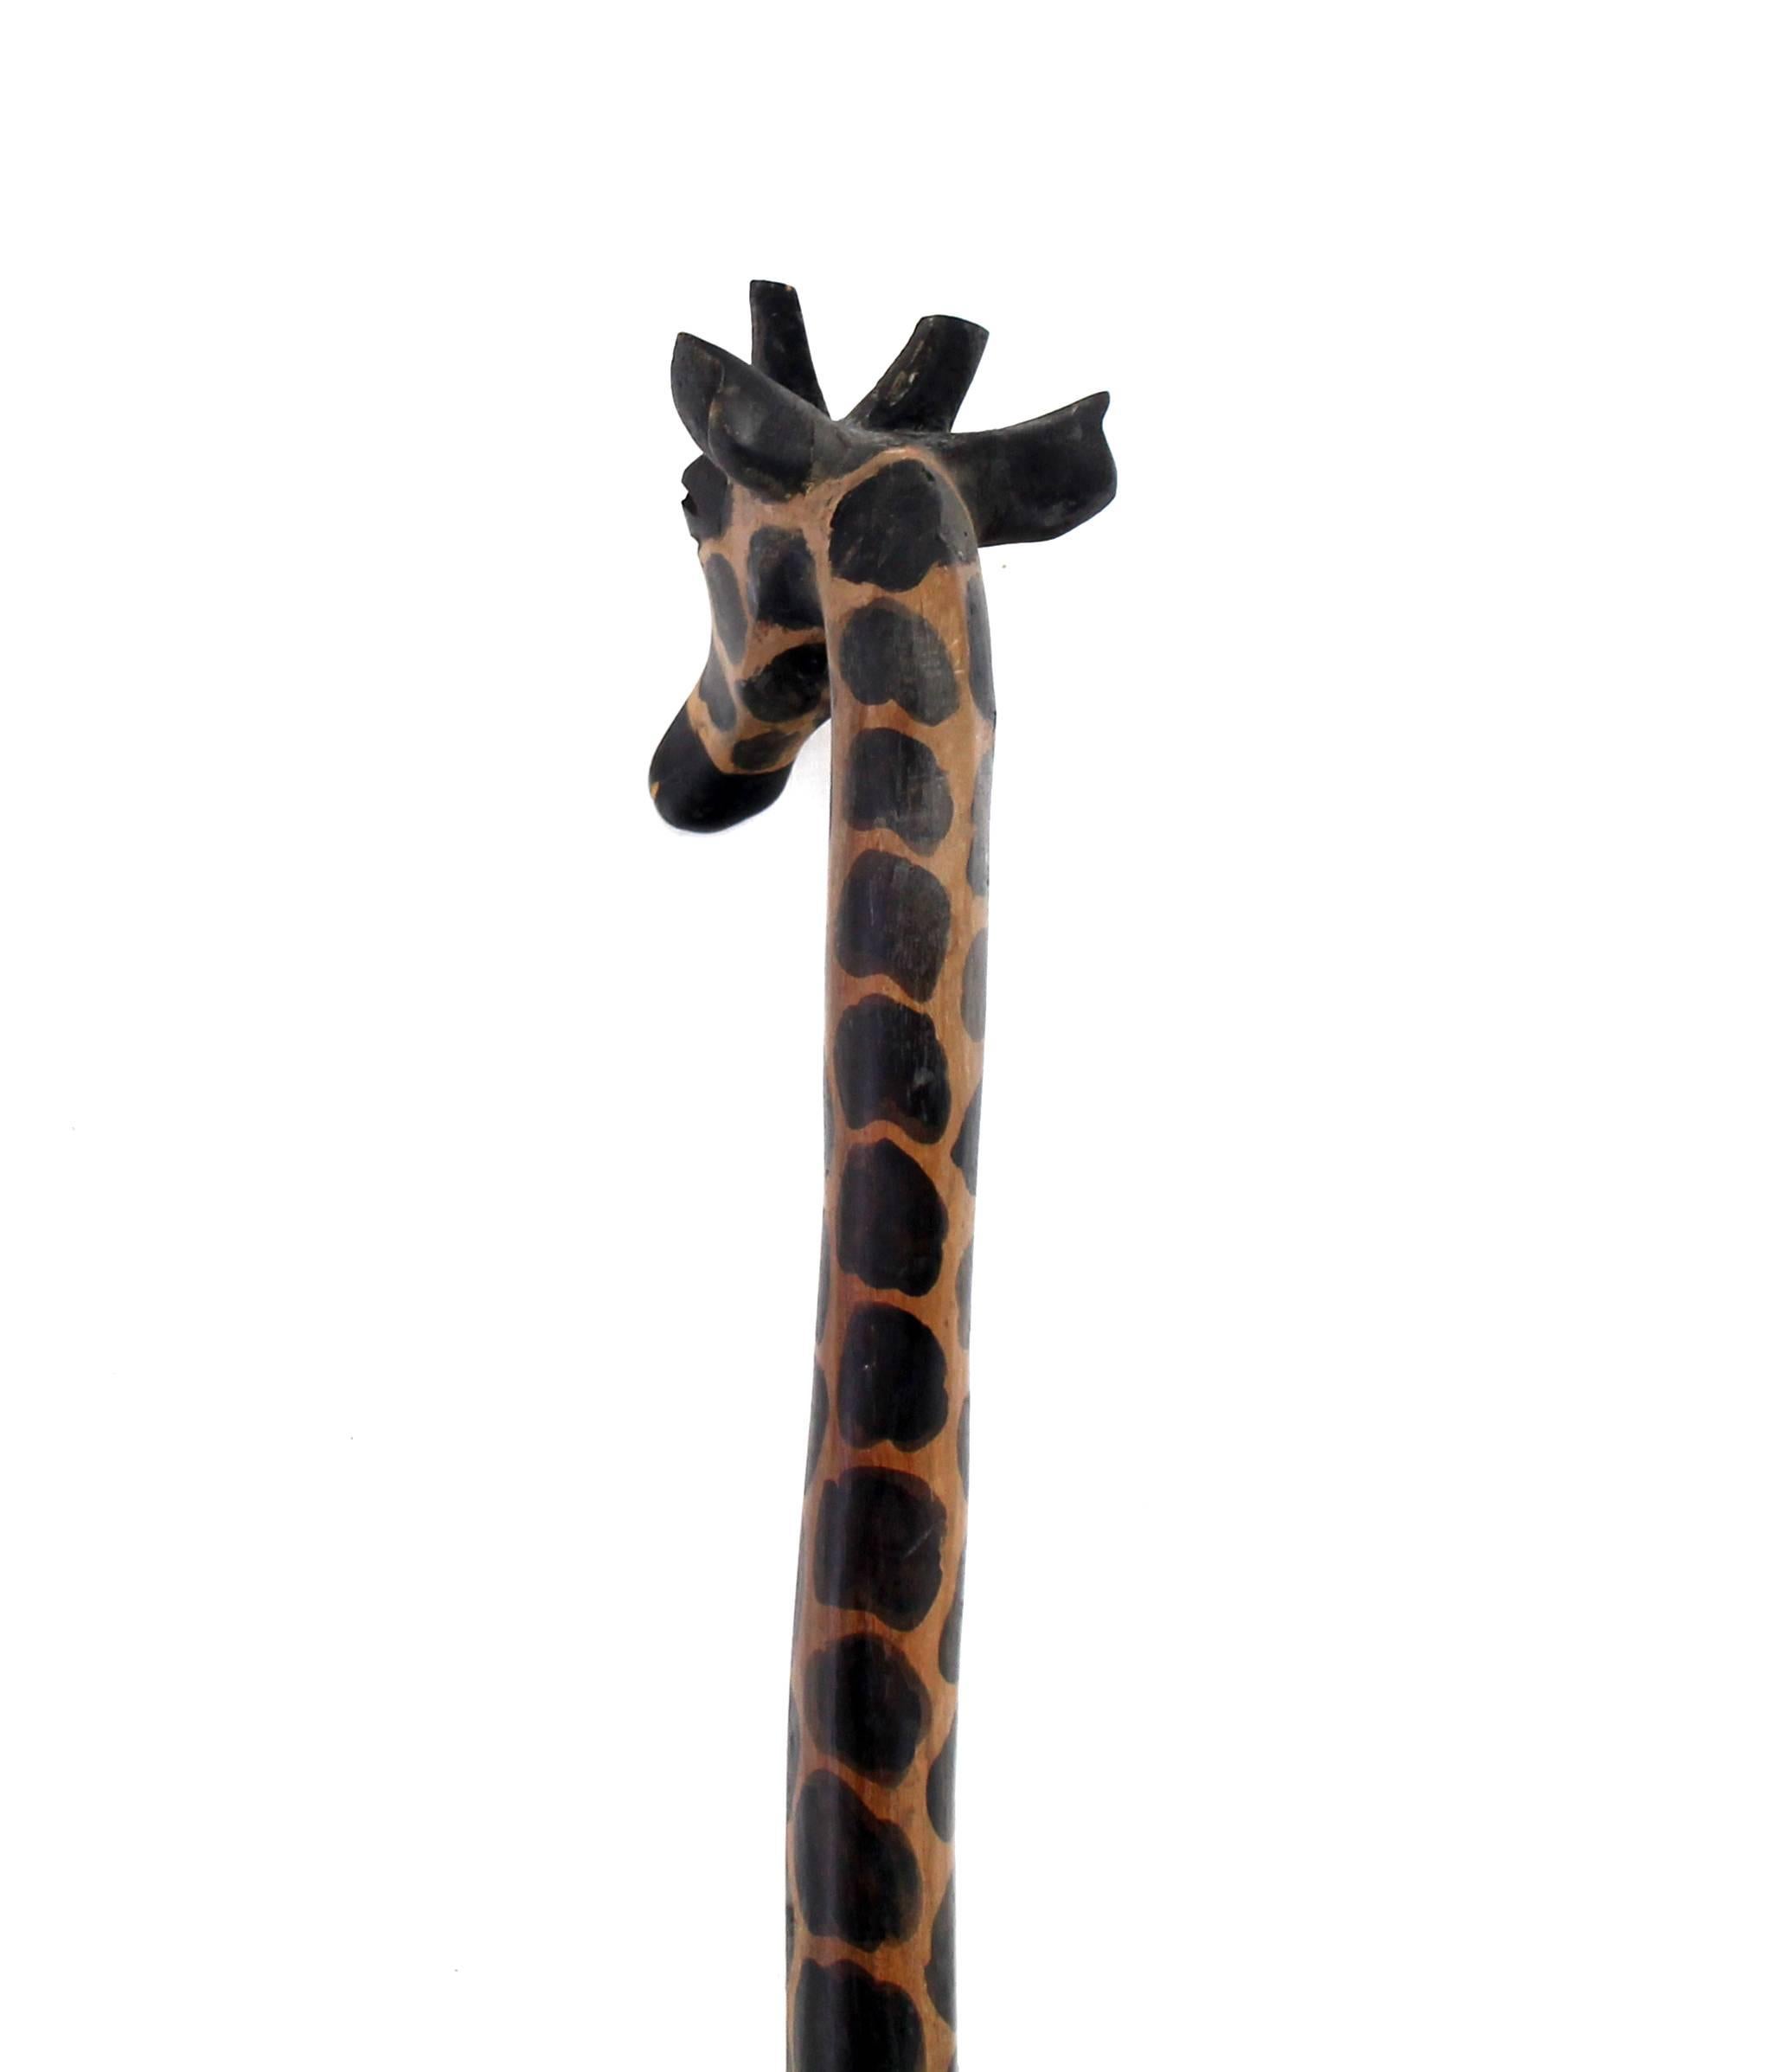 American 10' Tall Carved Sculpture of a Giraffe on Long Legs.